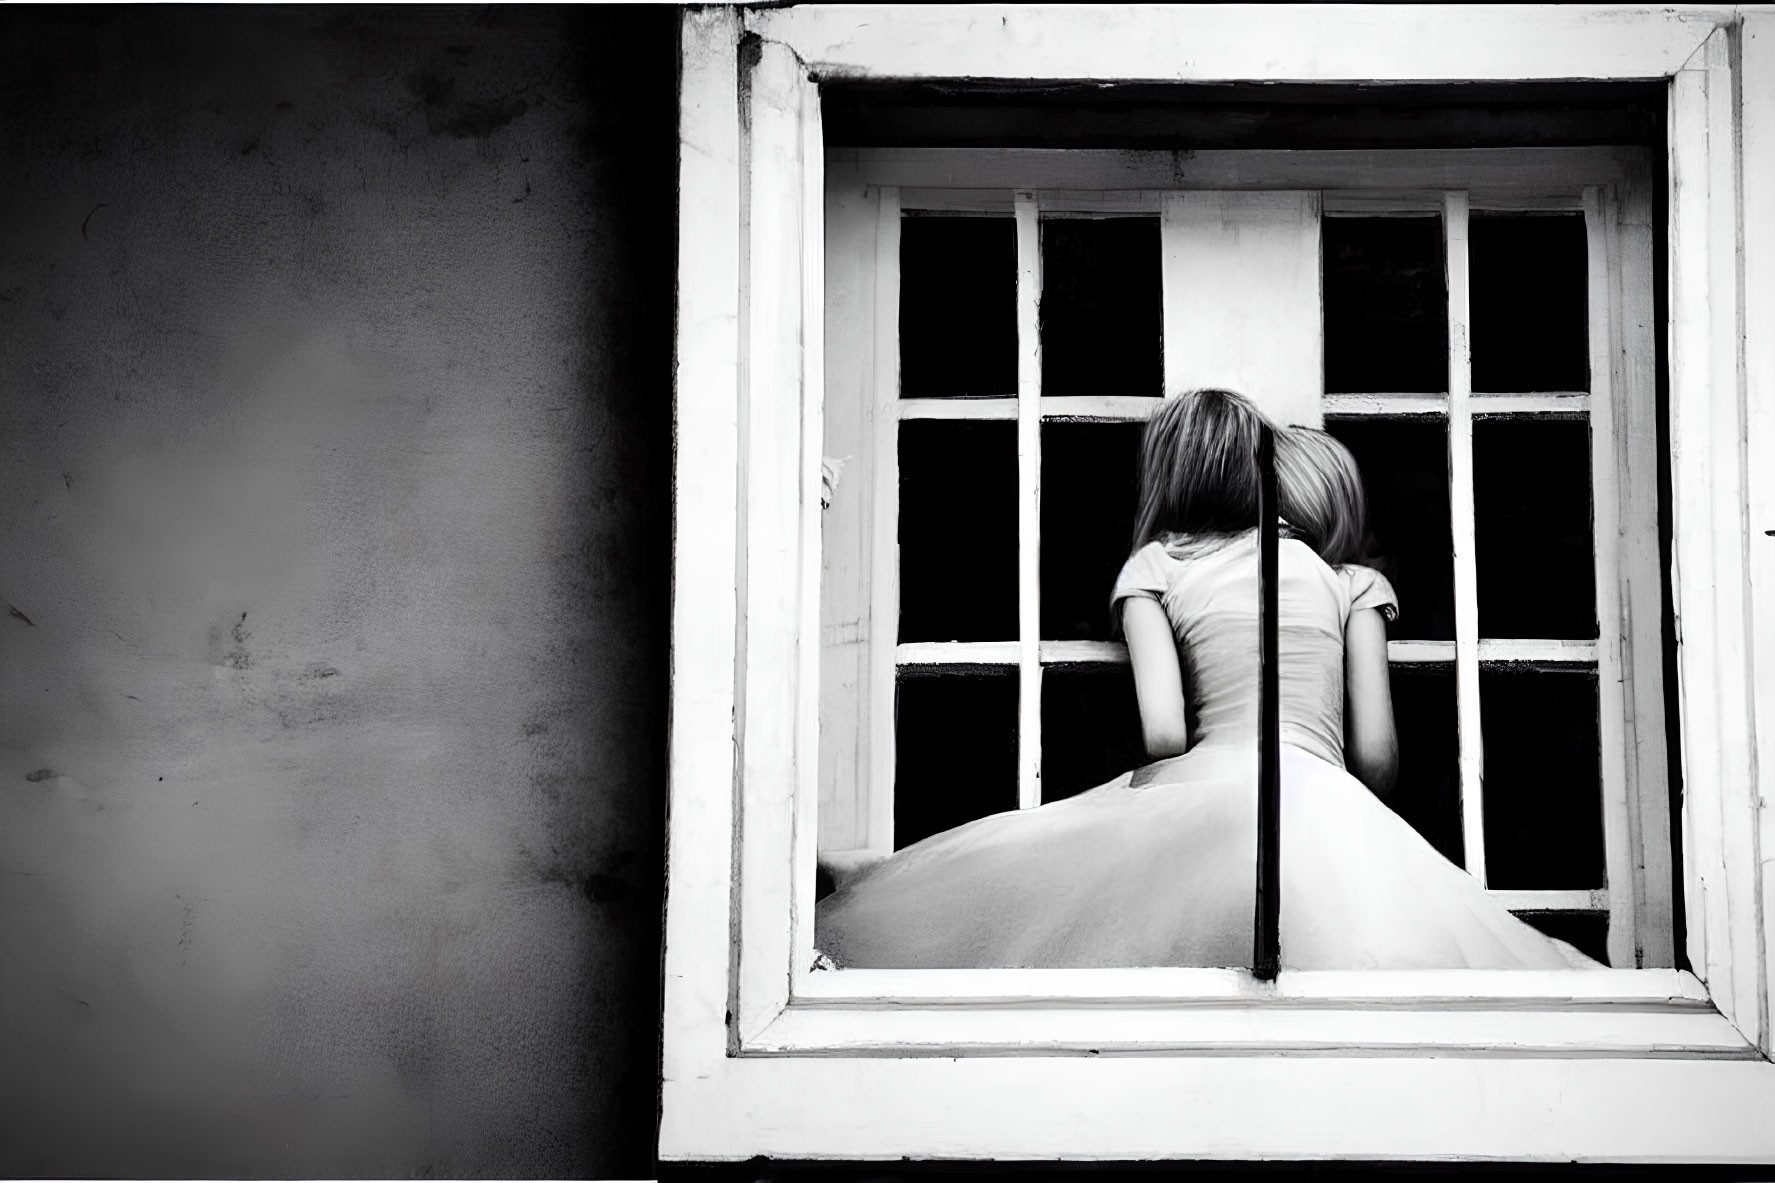 Monochrome photo of person in dress by window, back turned